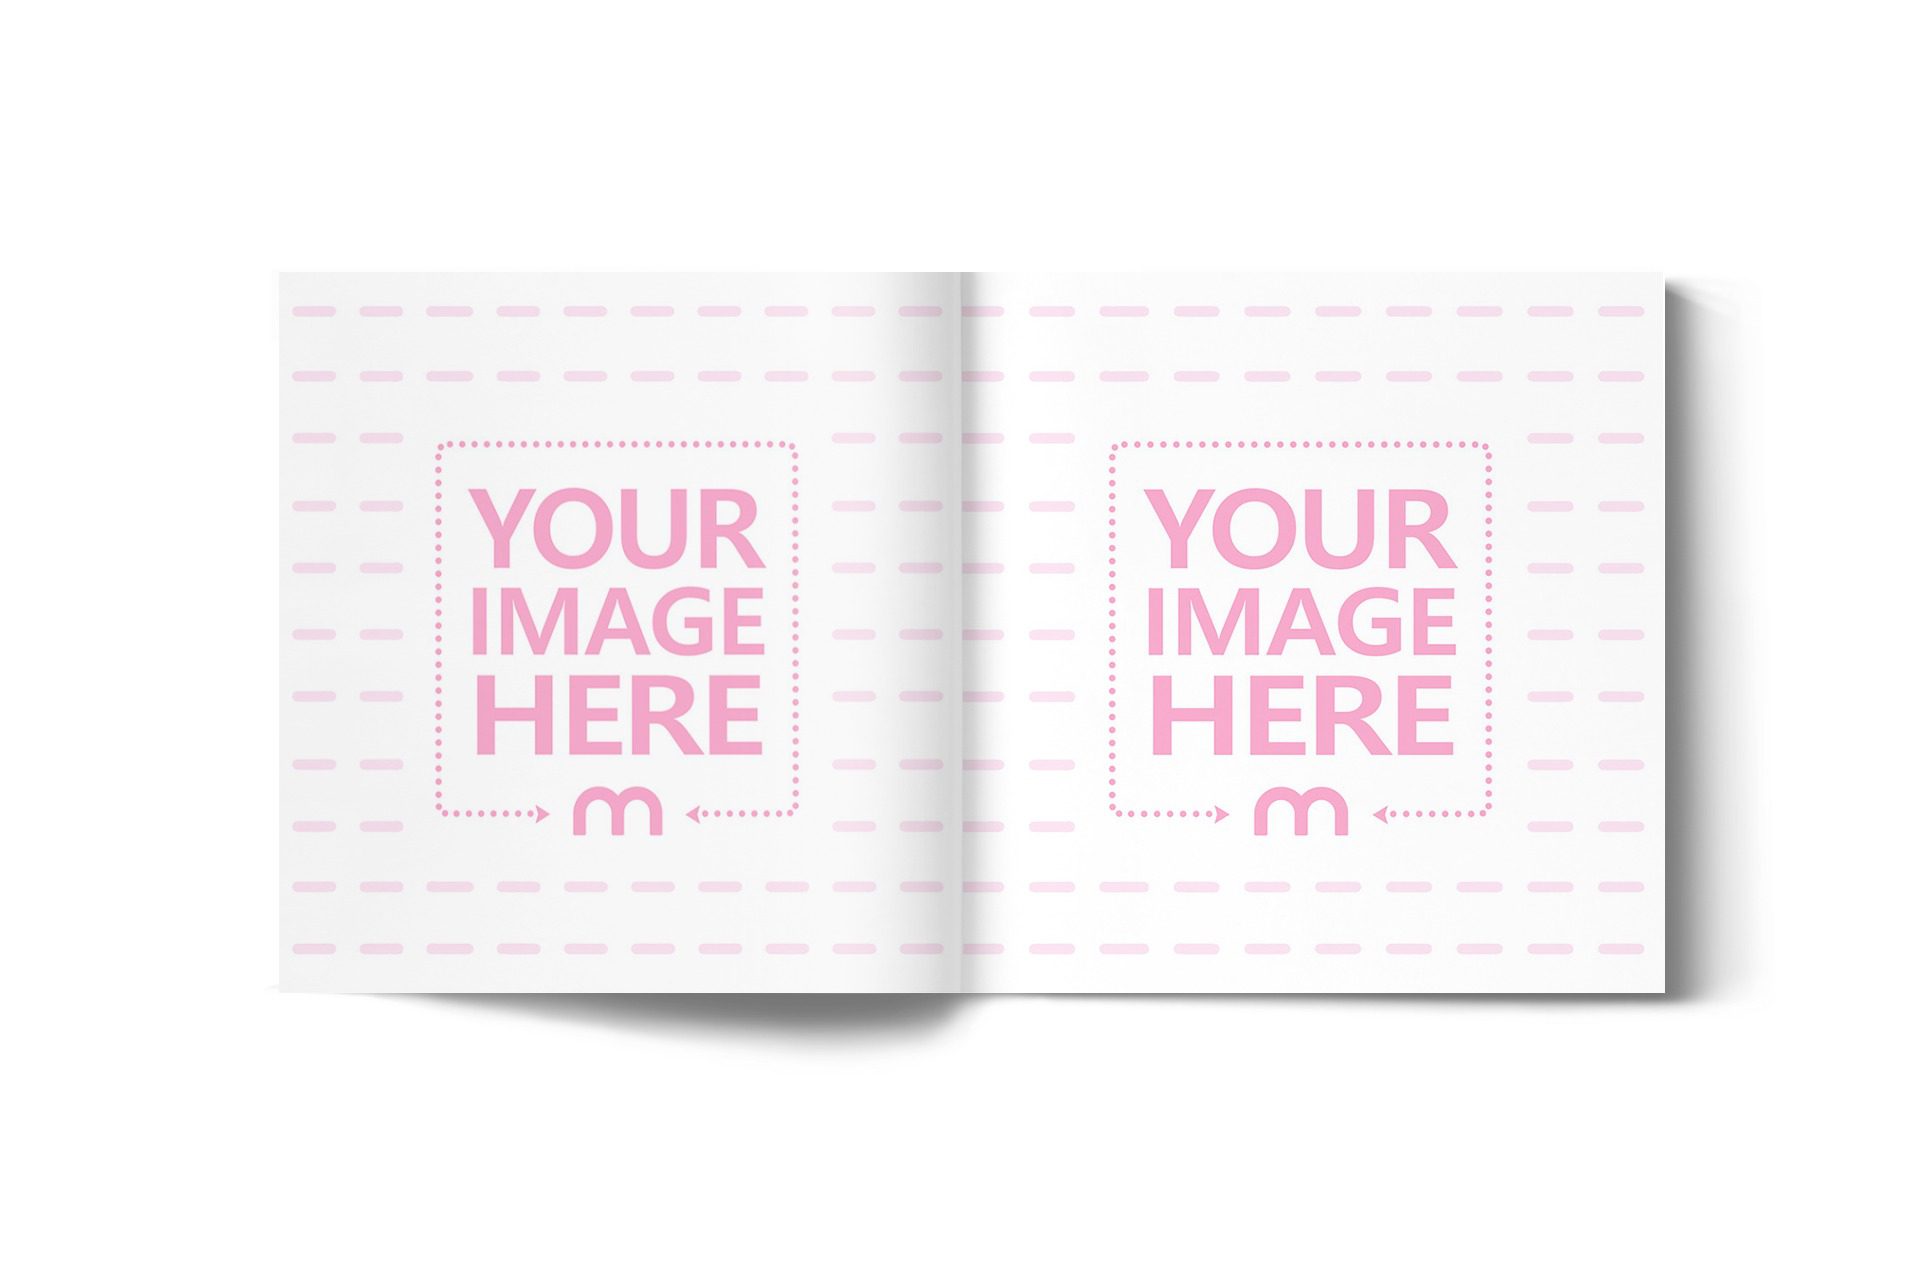 online mockup generator template with a square book design